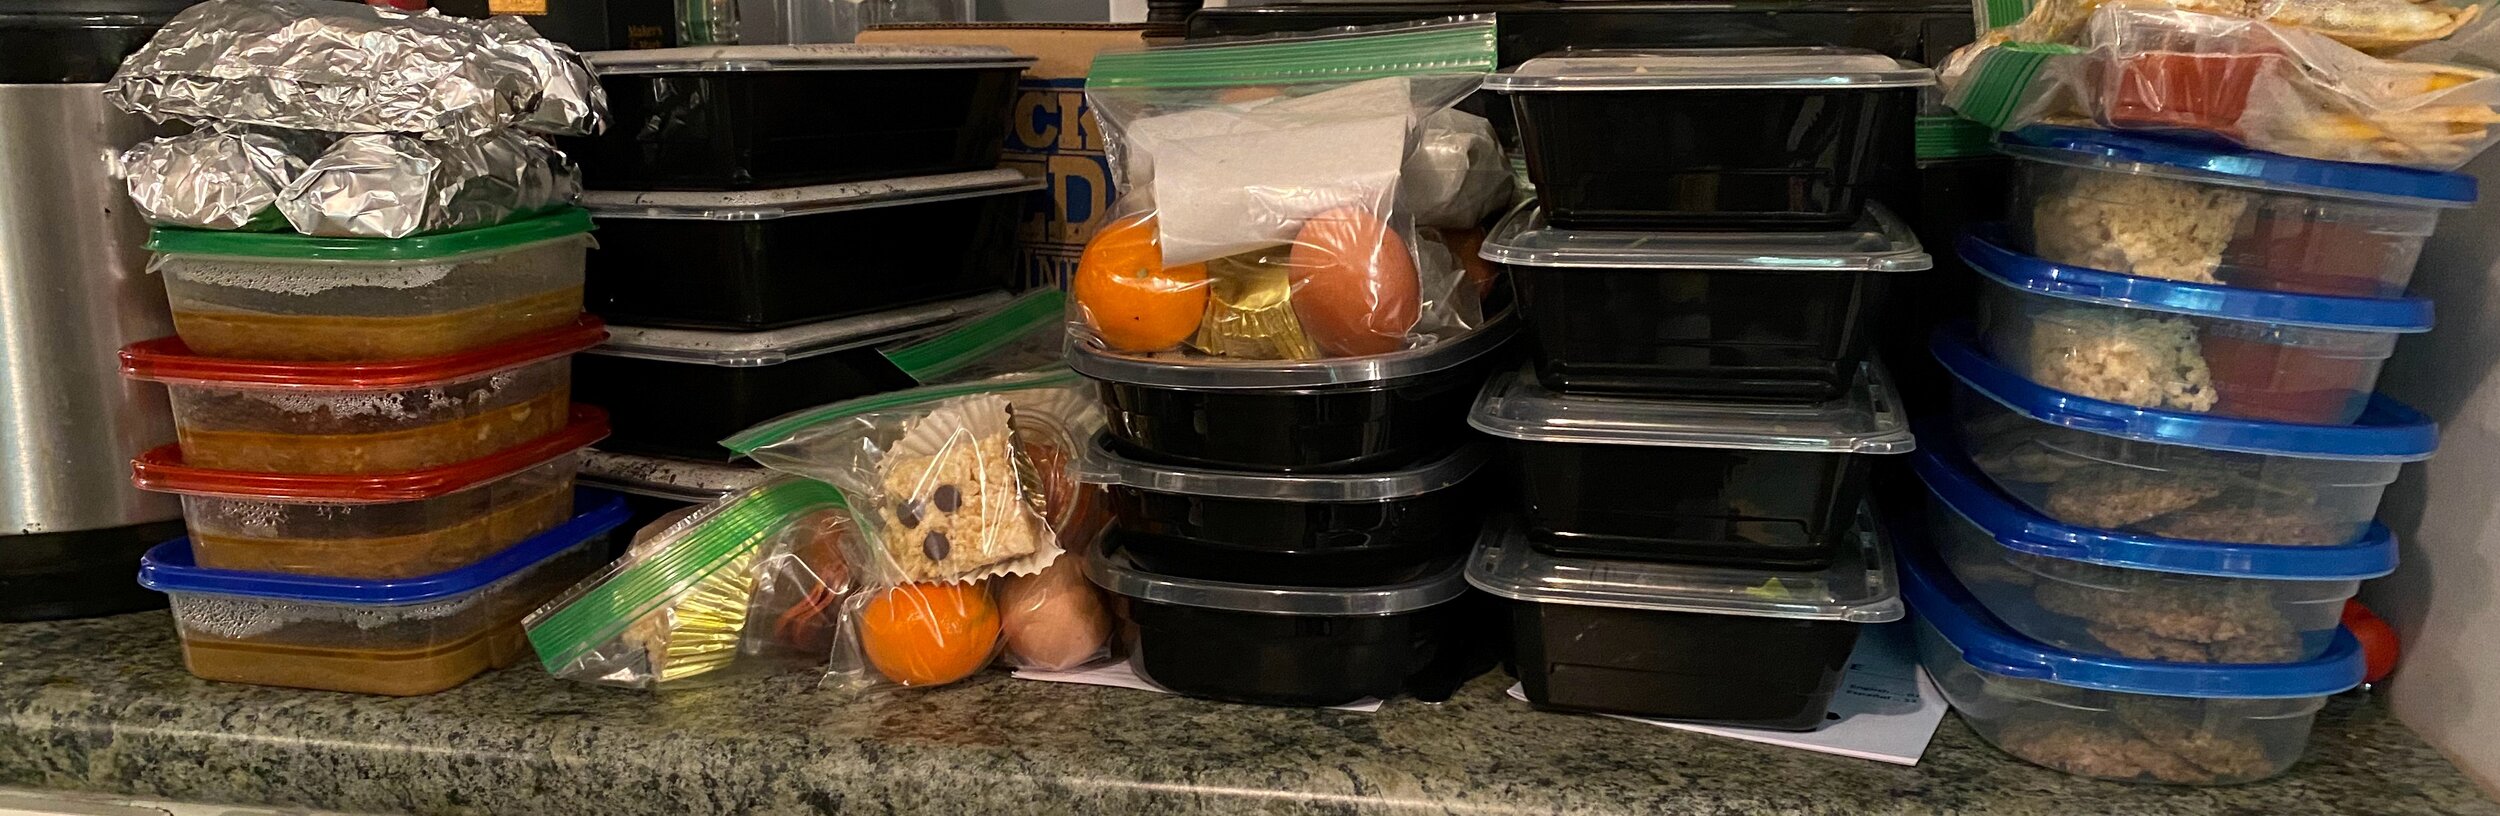 Kitchen Meal Prep Containers Food Produce Fridge Saver Containers